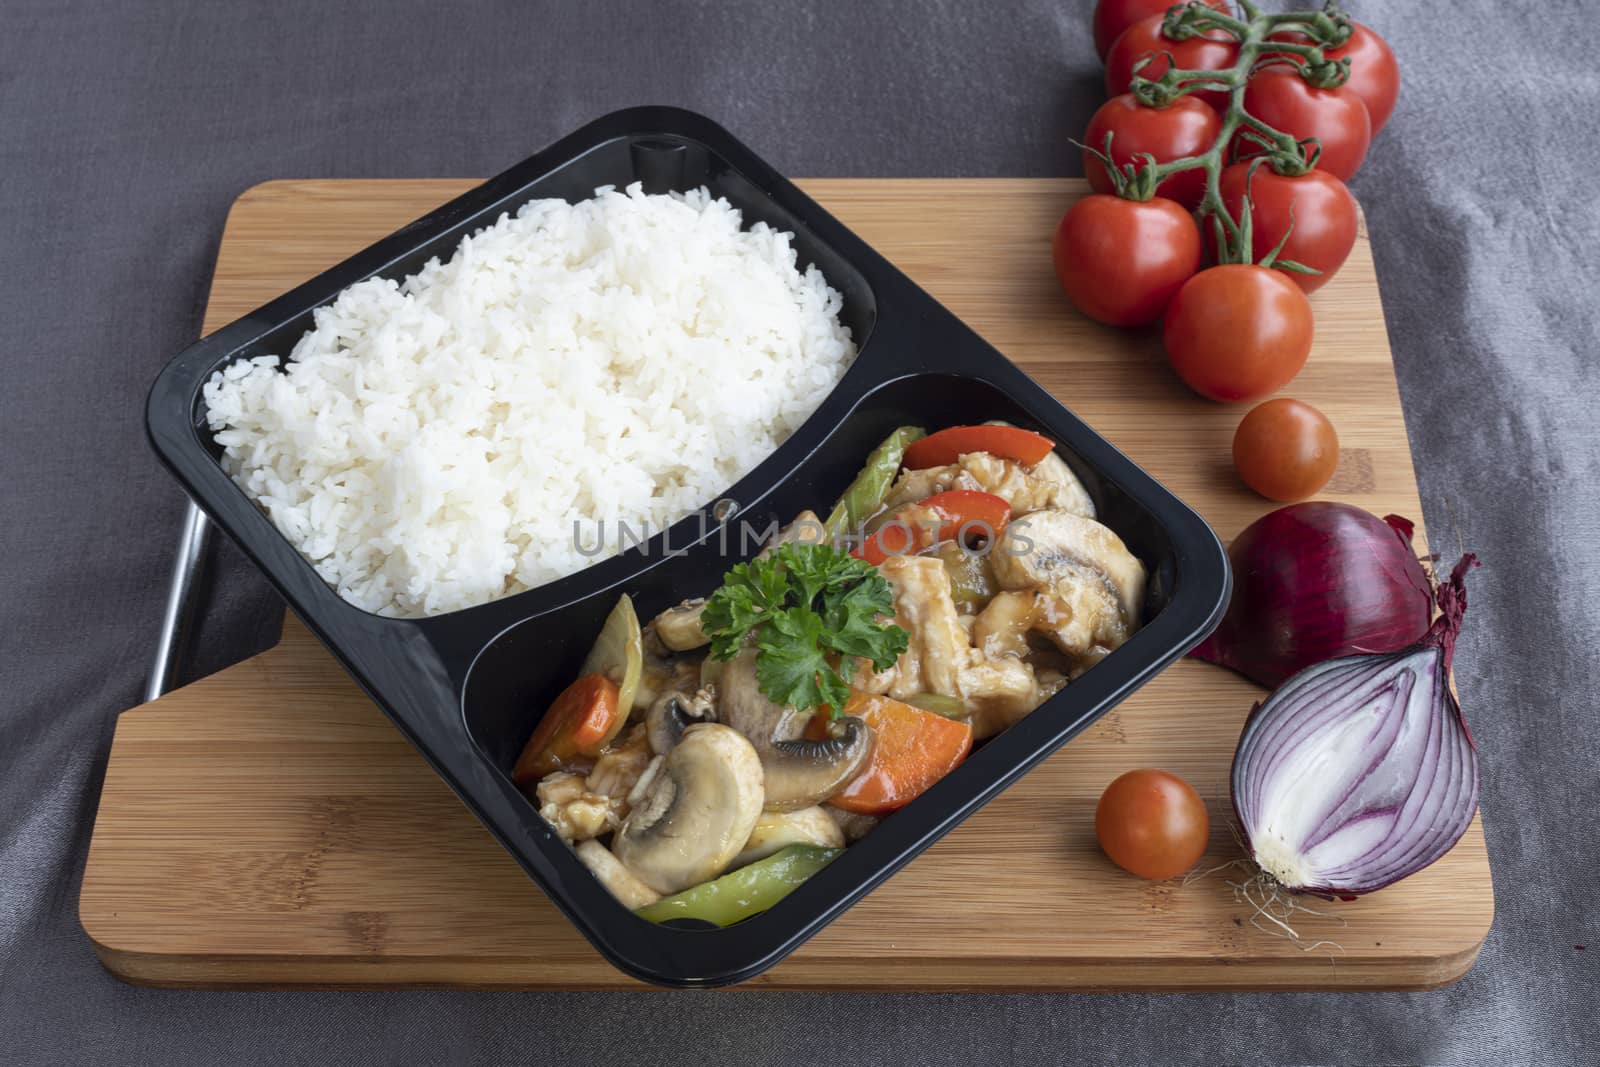 Stir fried chicken with white rice and vegetable served in a recipent for take away